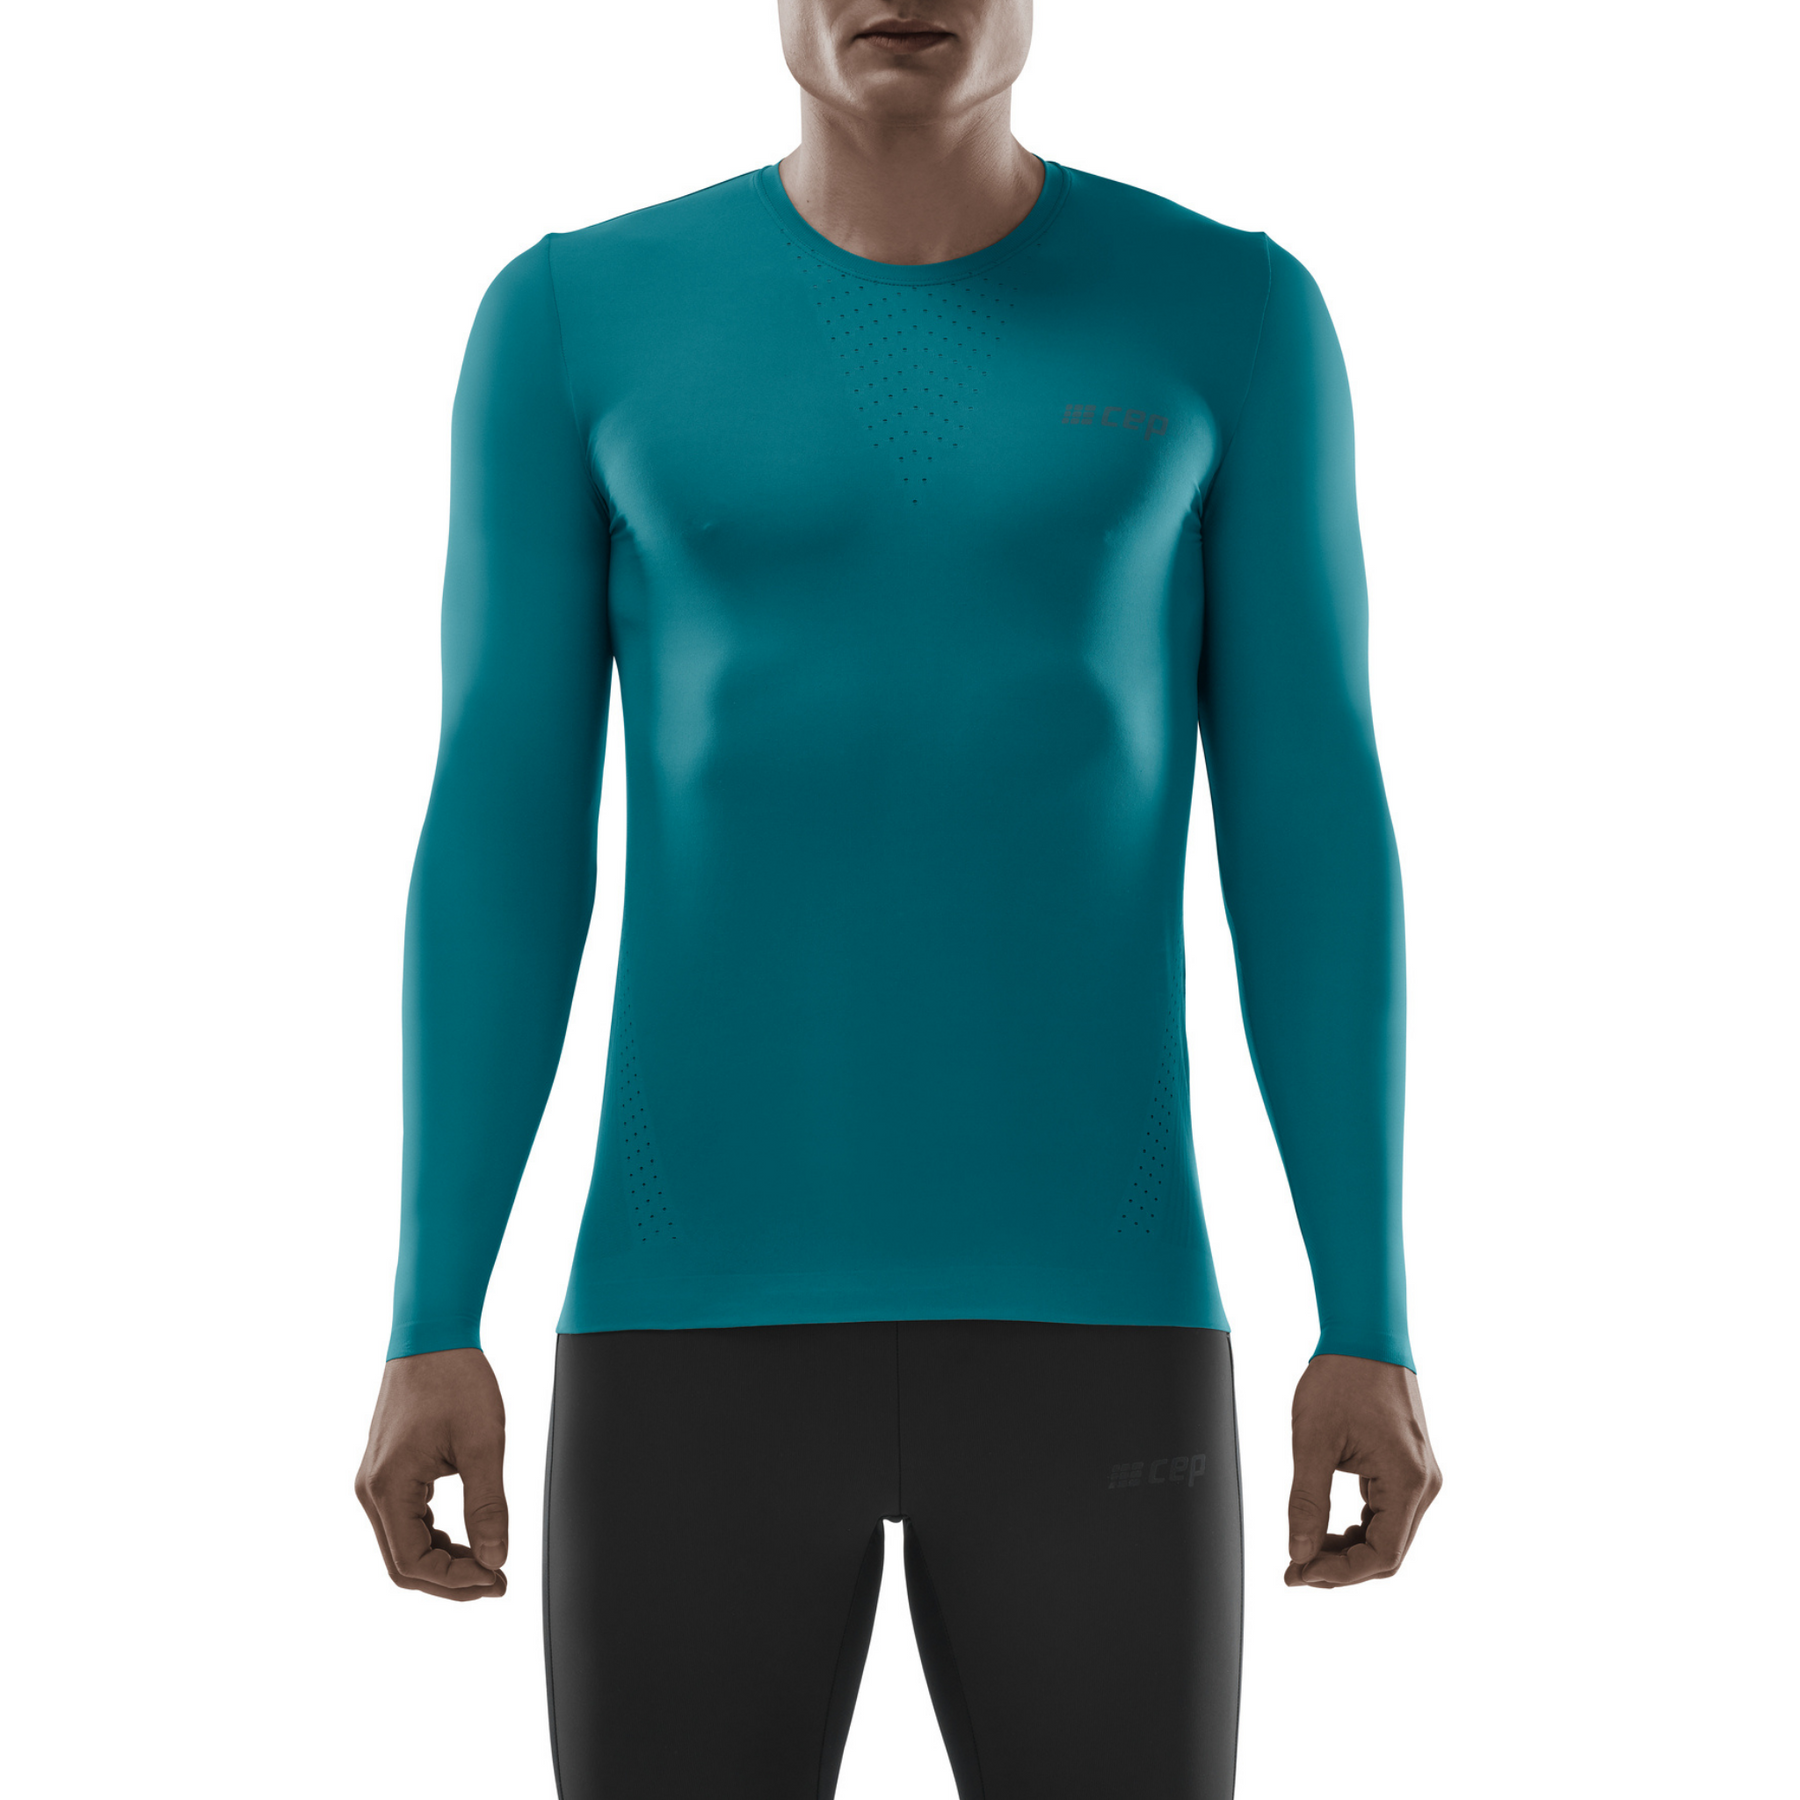 Long sleeve jersey CEP Compression Reflective - Long Sleeves - The Heights  - Mens Clothing